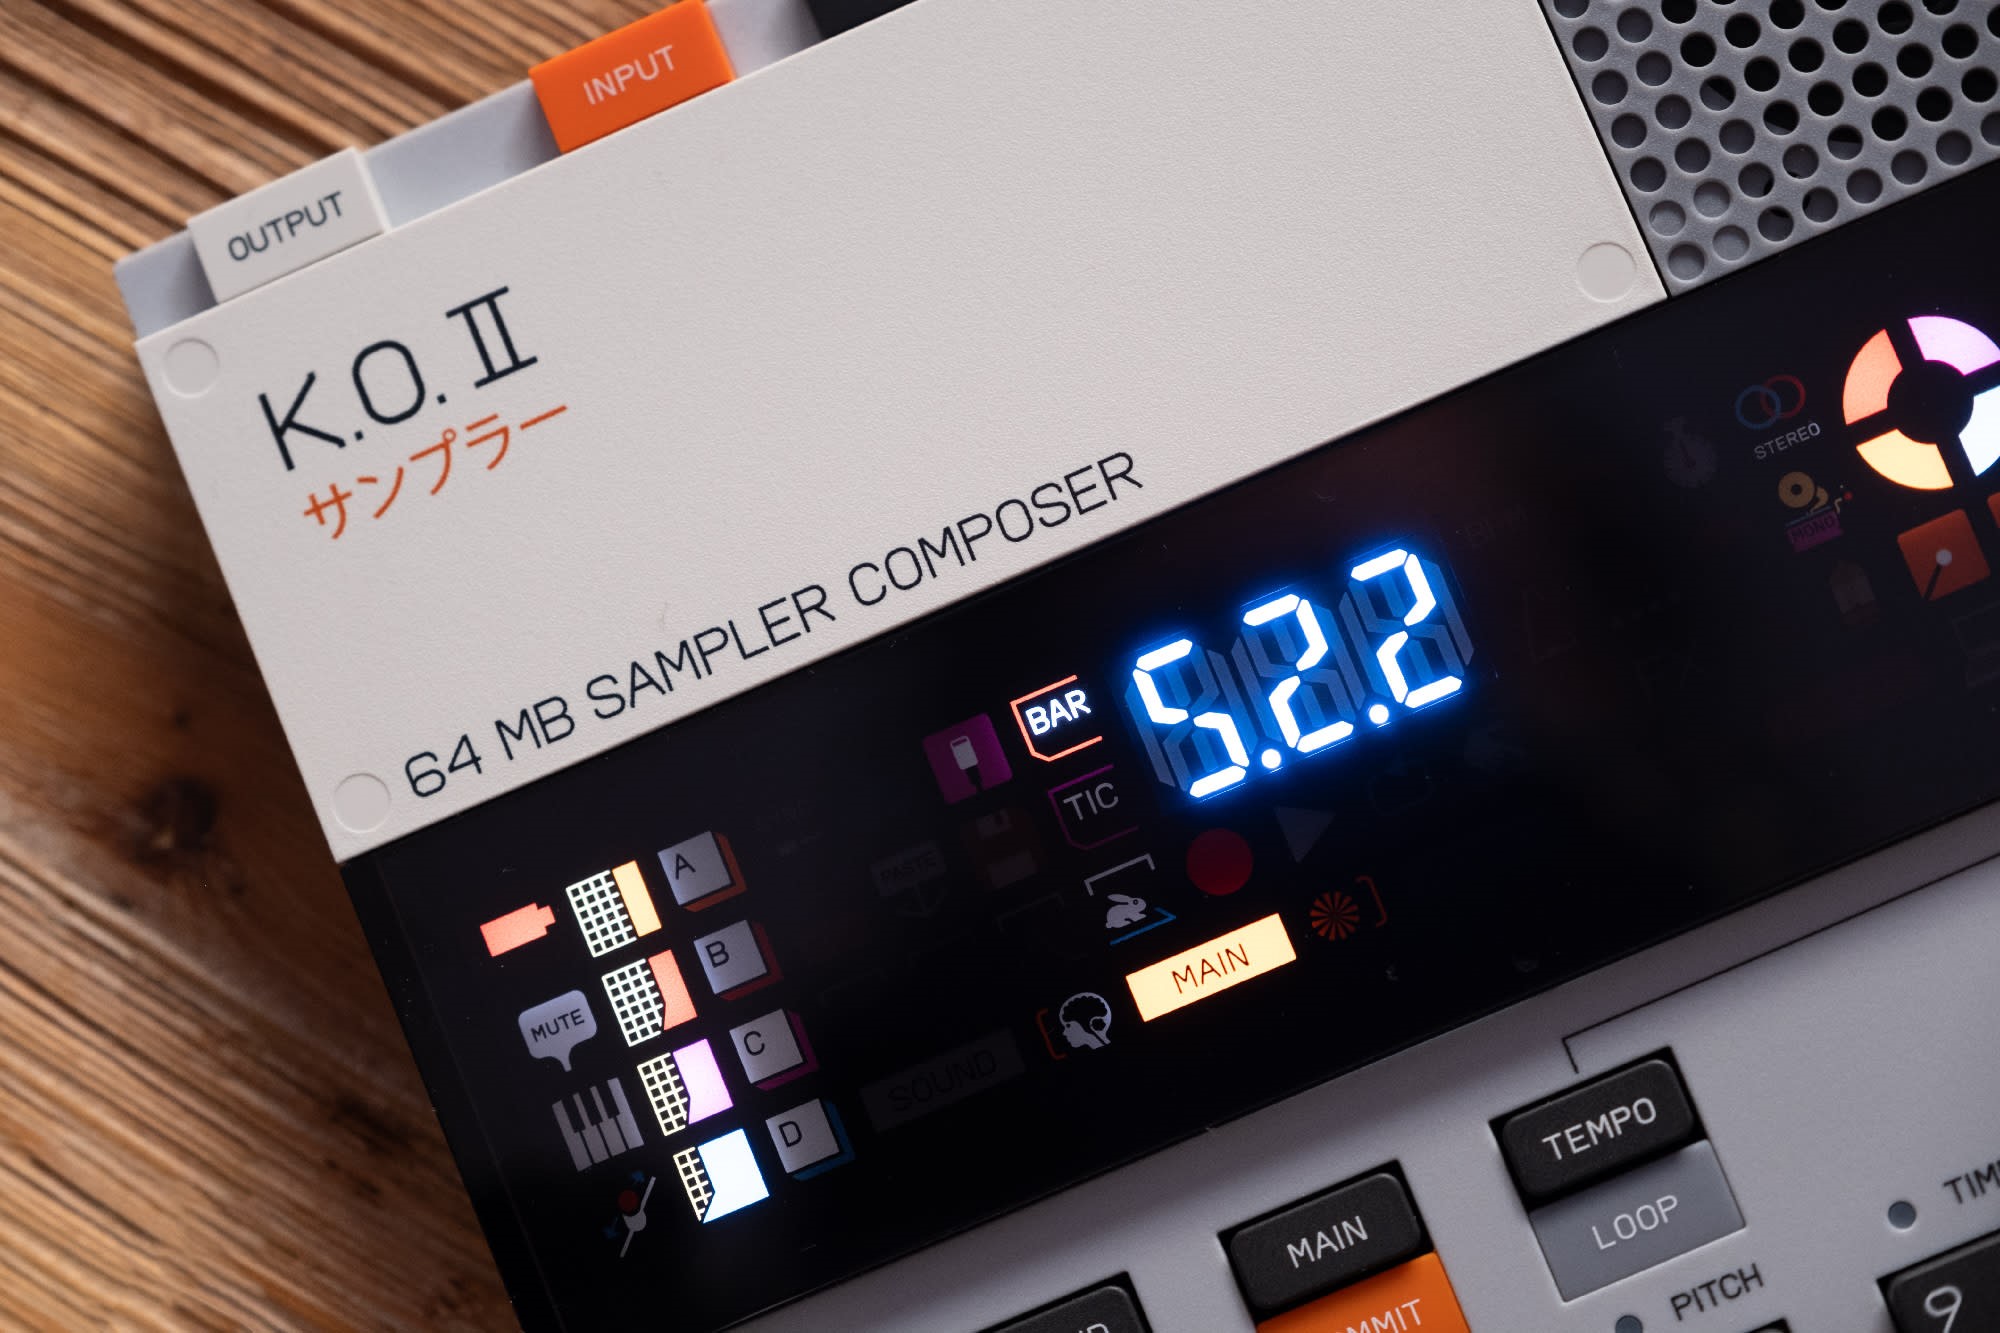 Teenage Engineering's K.O. II sampler proves the company can do cost-friendly cool | DeviceDaily.com